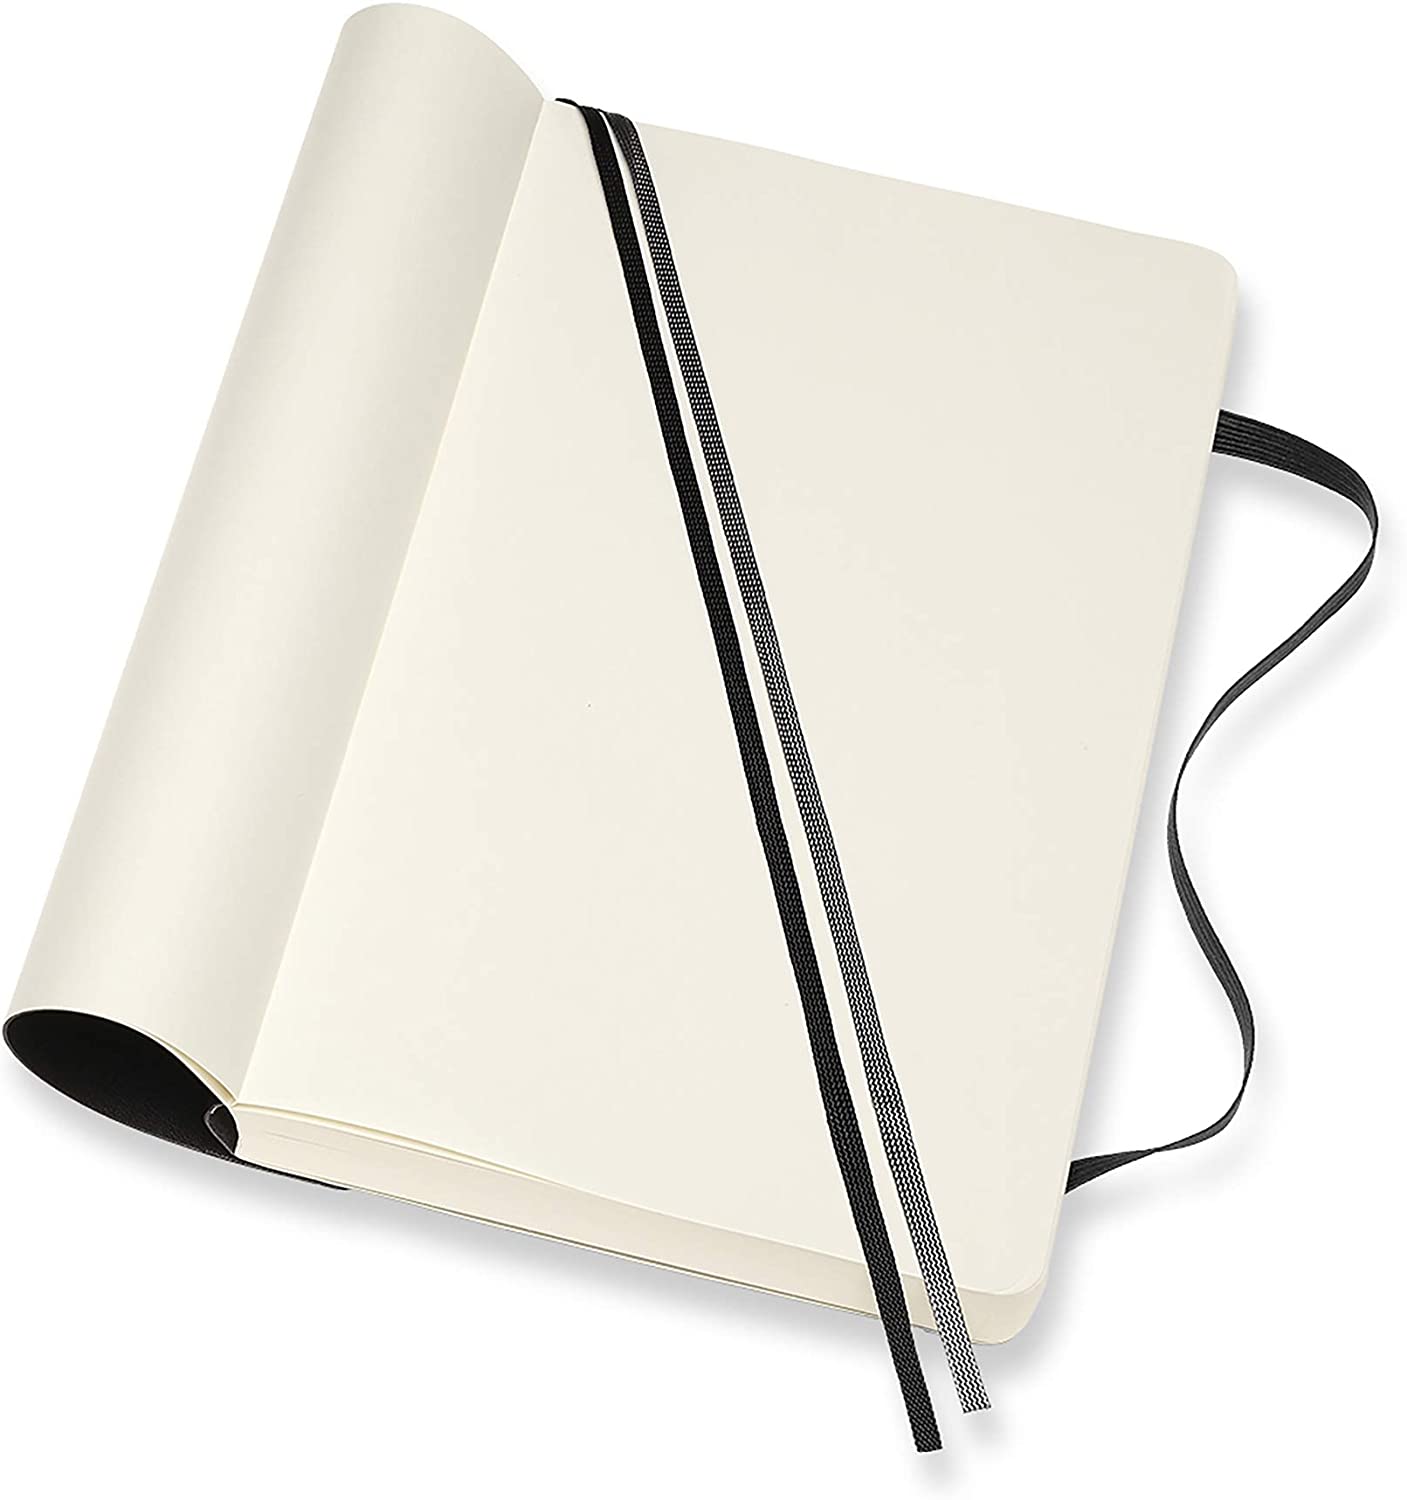 A5 Binder Notebook, Rose Gold 6-Ring Binder with 90 Nepal